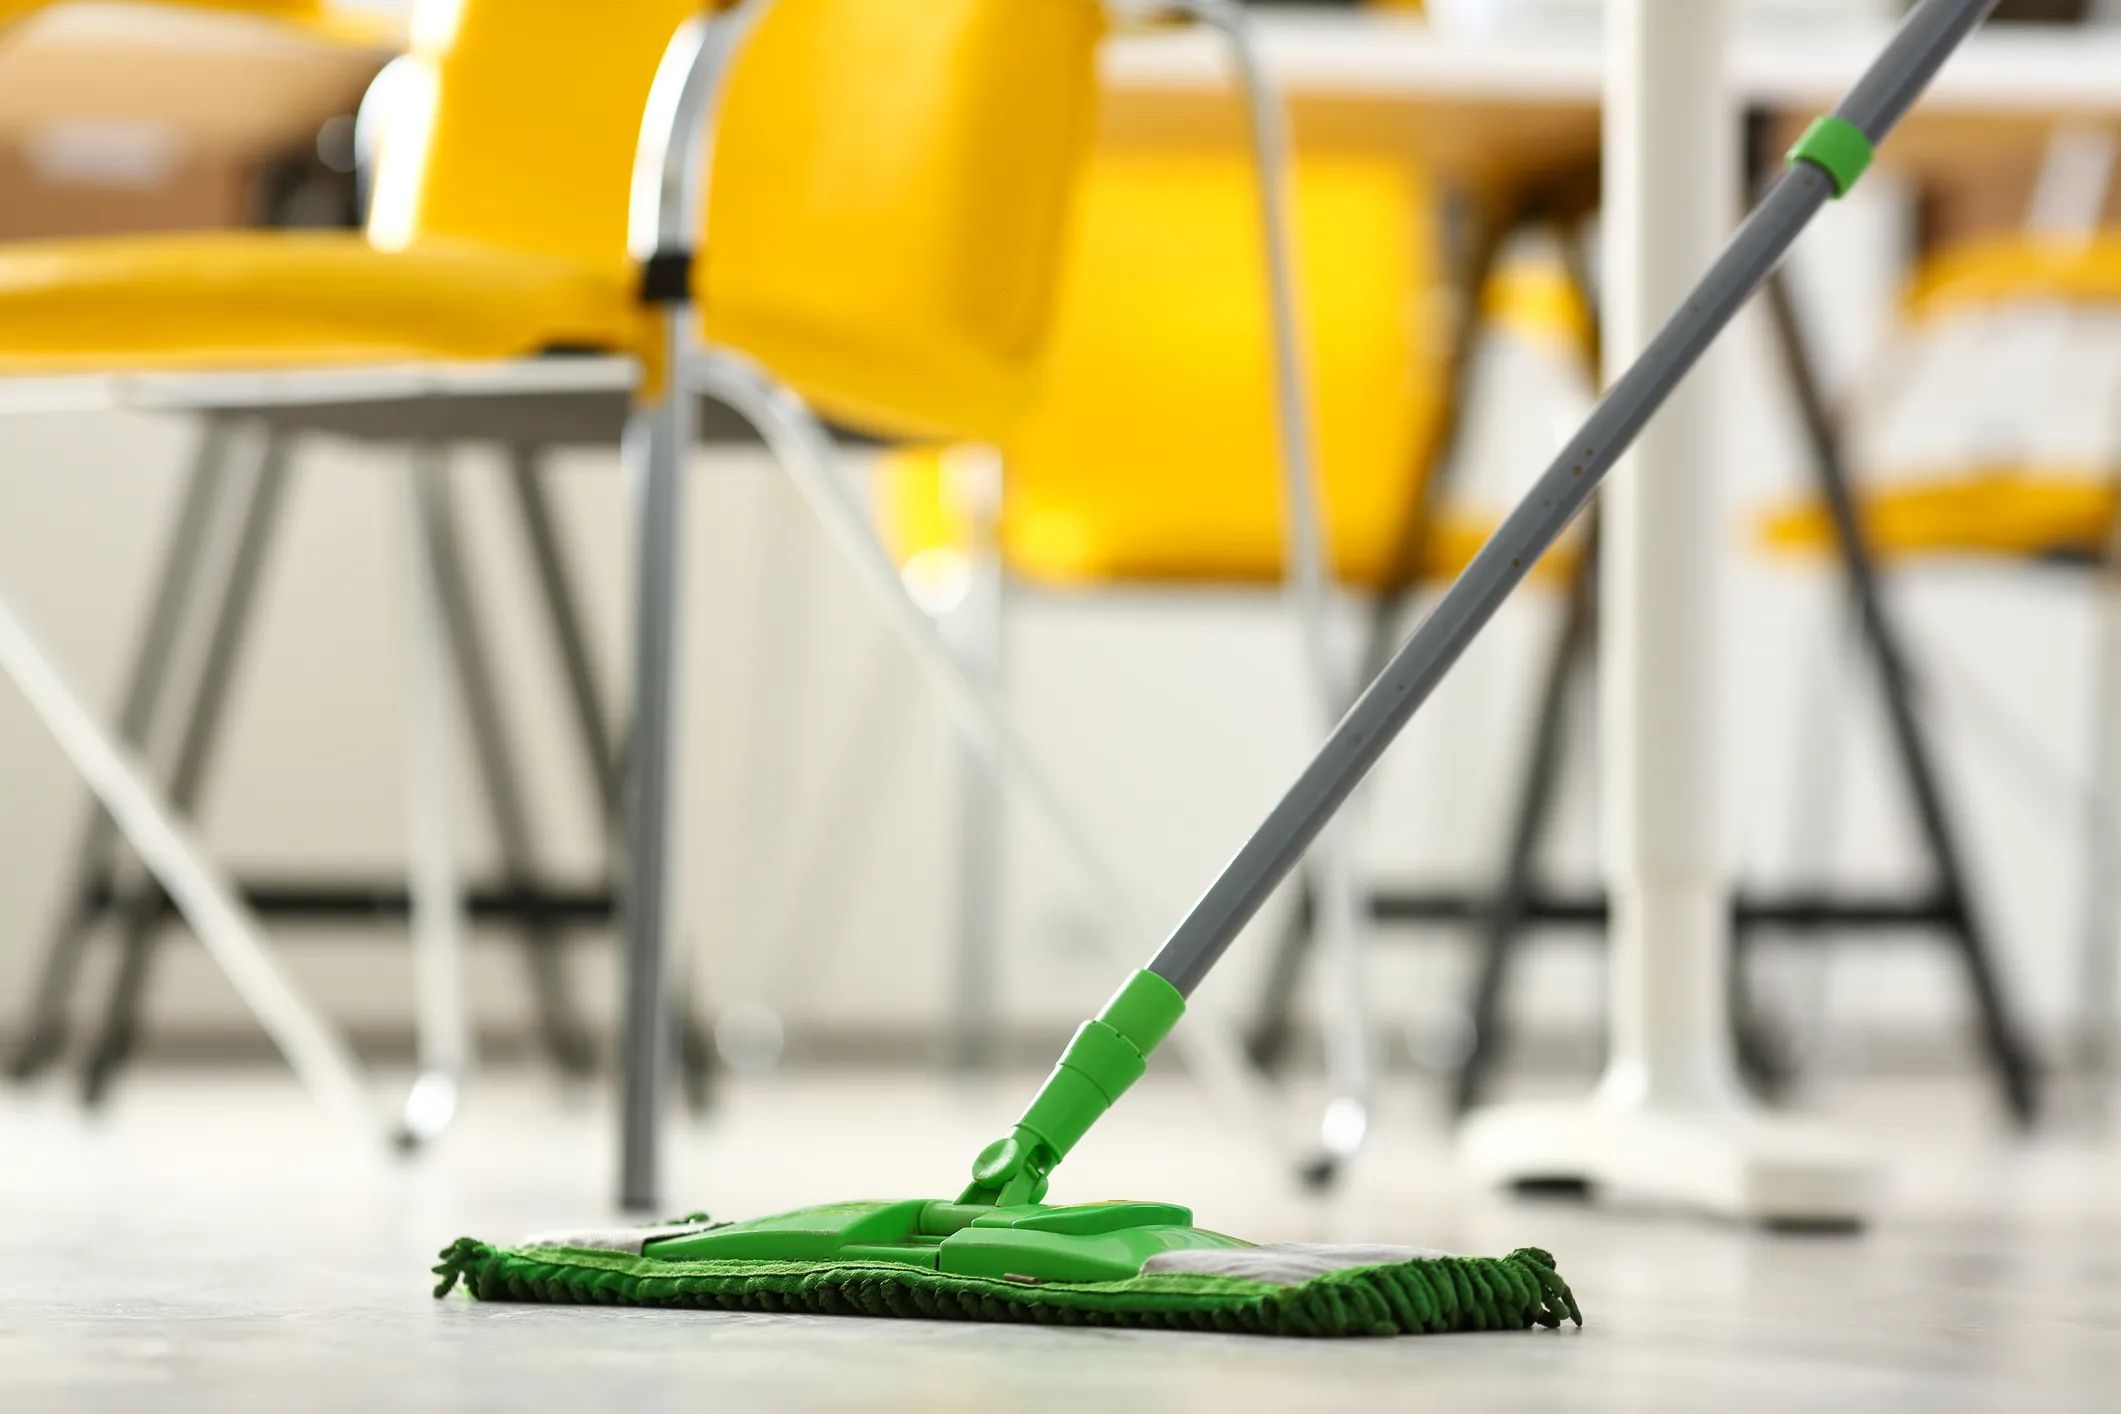 How to Keep Your School Clean